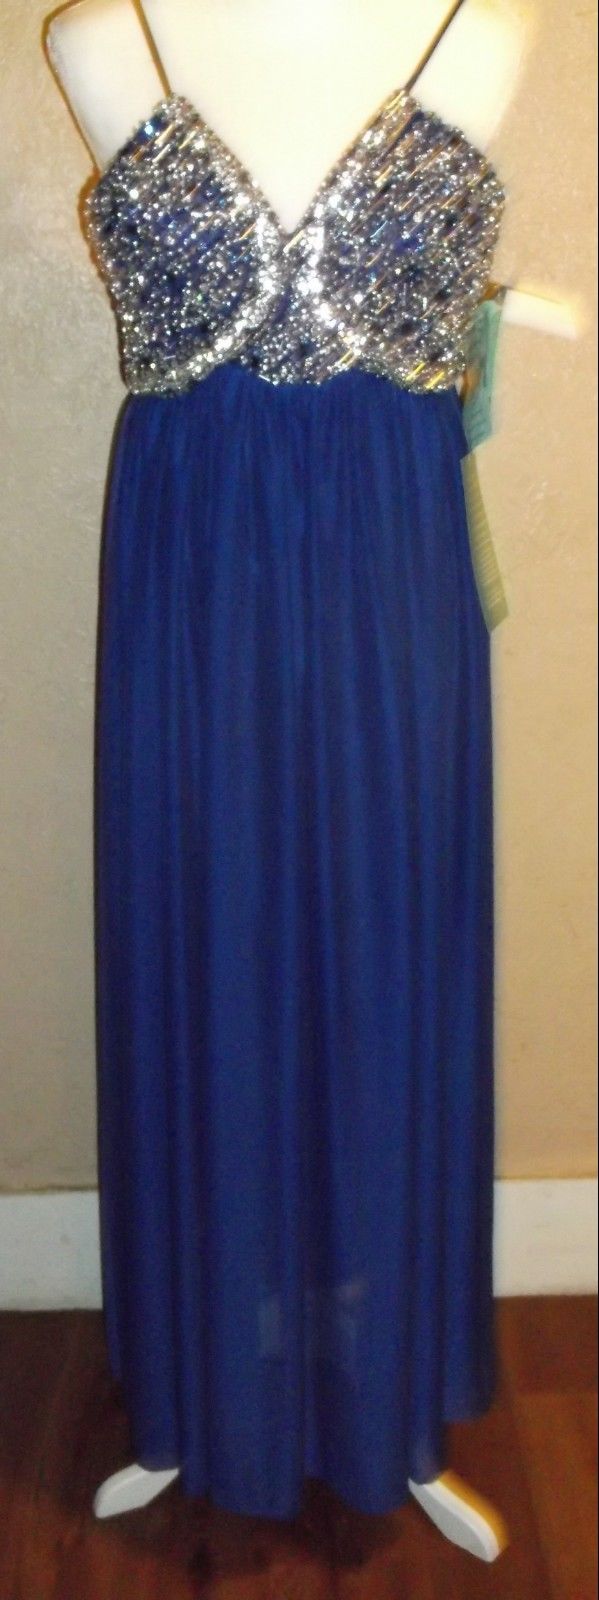 NWT MY MICHELLE PROM DRESS EVENING GOWN  womens sz 1 BLUE BEADED QUALITY